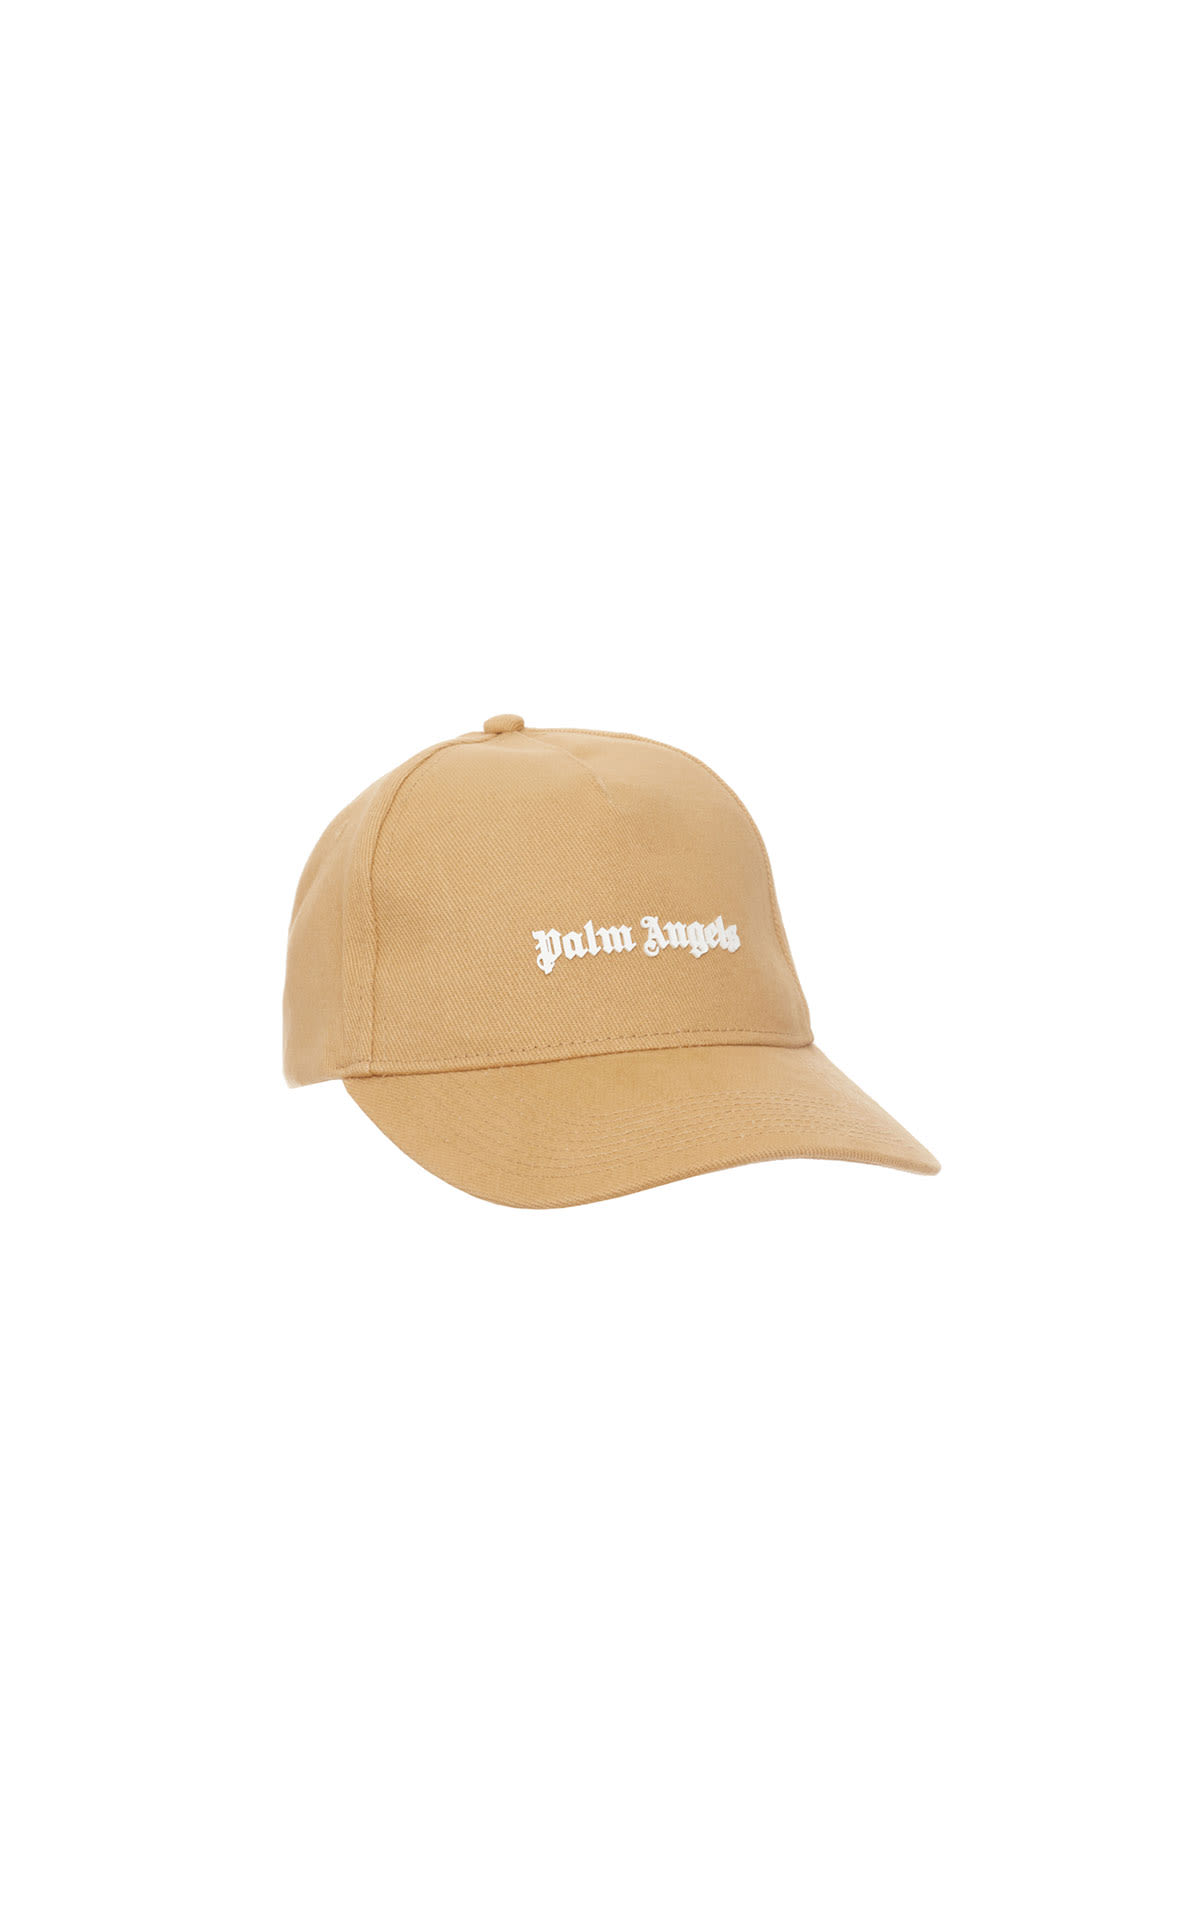 Palm Angels Classic logo cap from Bicester Village